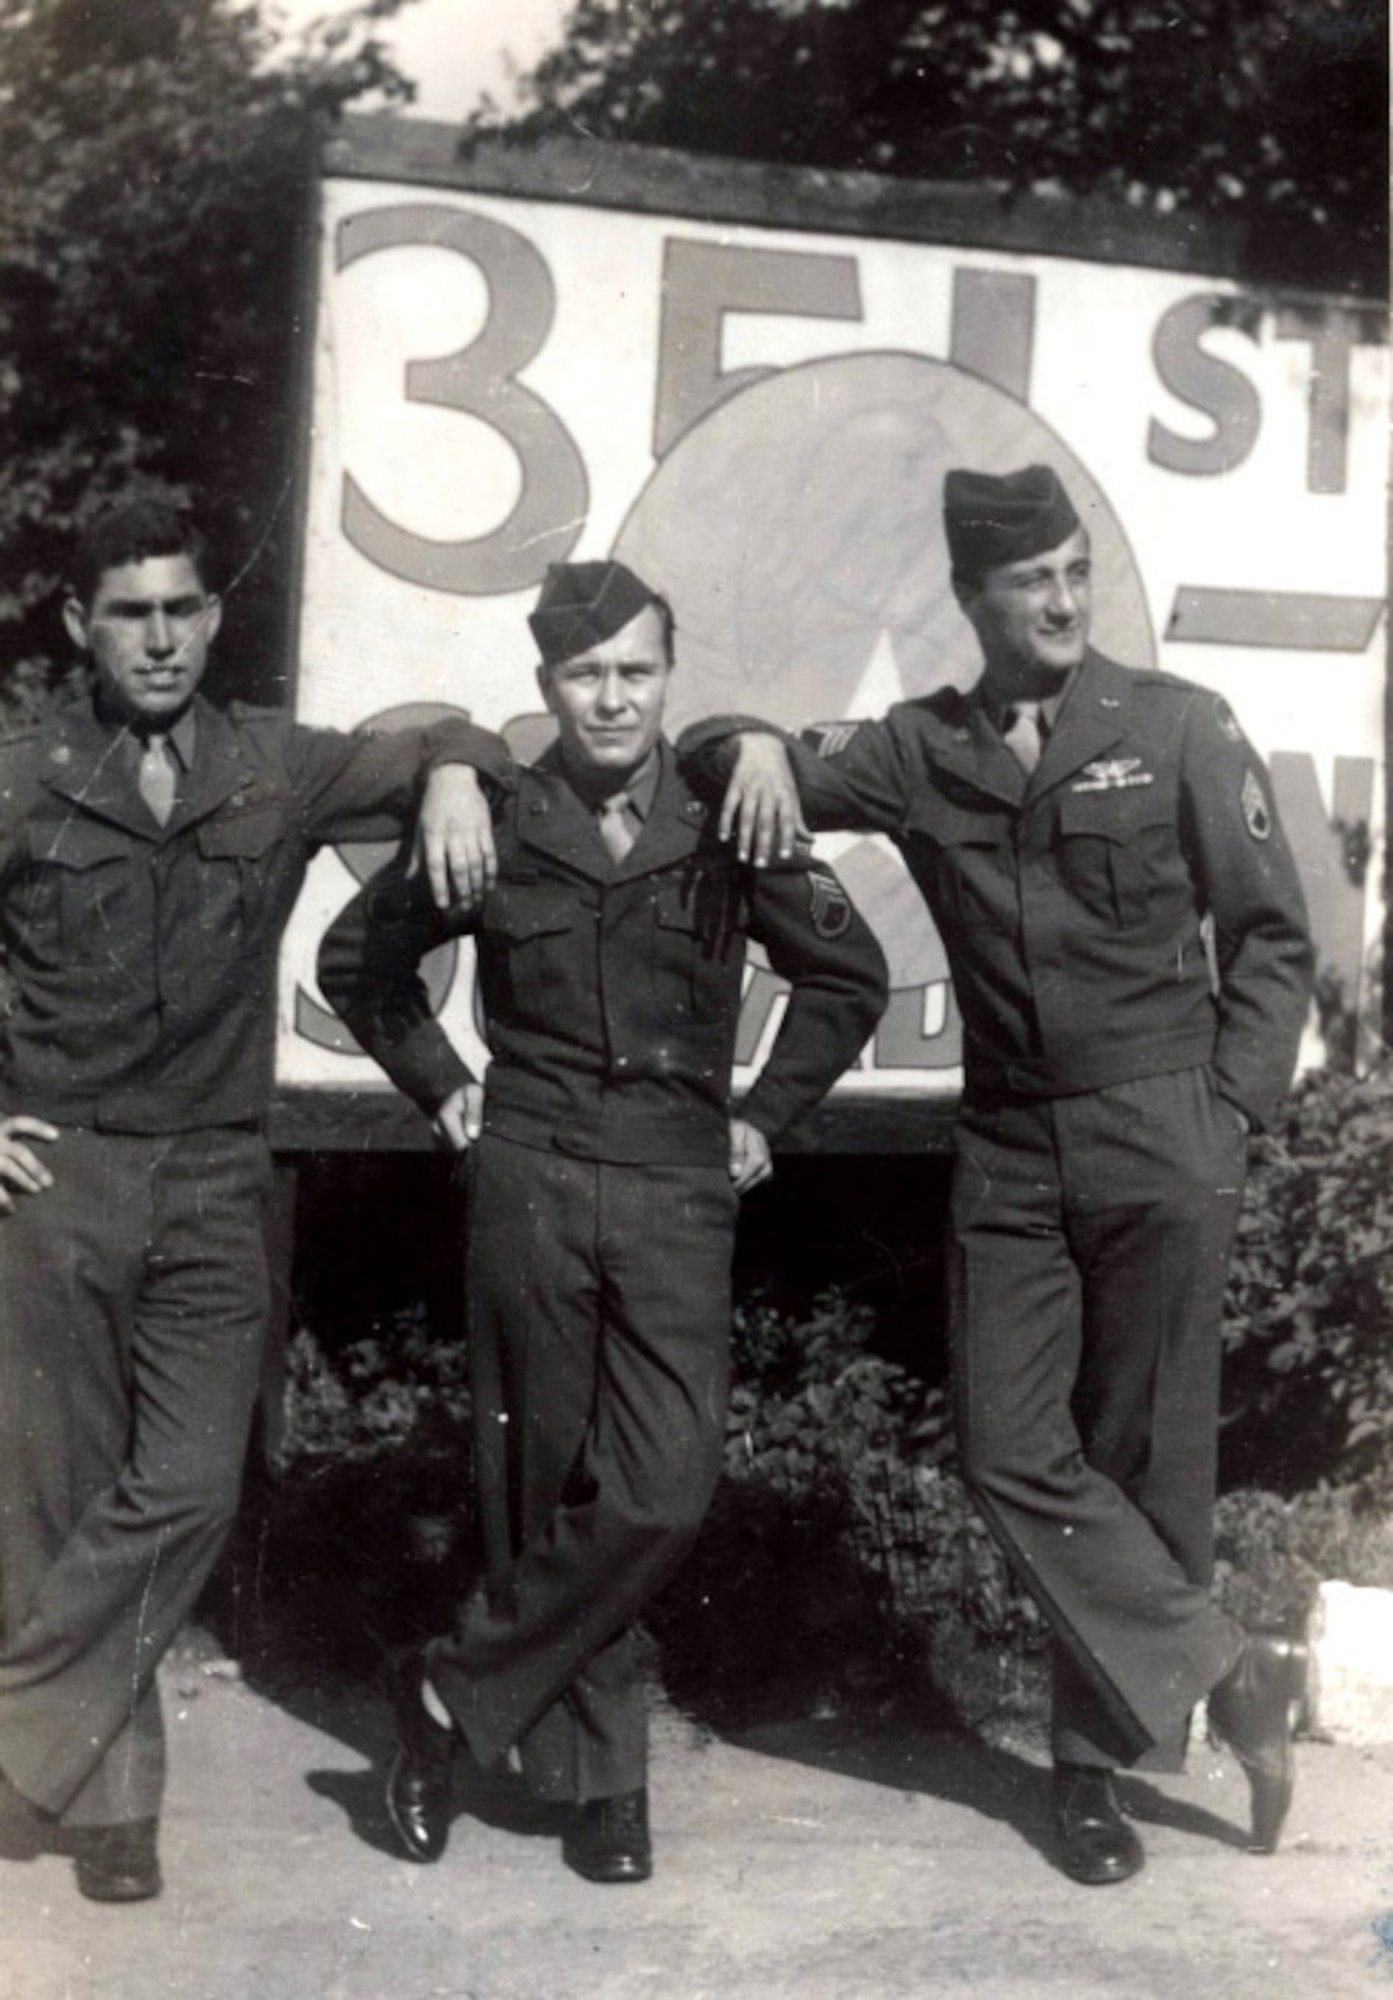 Joe Urice, left, Algie Davenport, center, and Rueben Laskow, 351st Bomb Squadron Airmen, pose for a photo at the 100th Bomb Group, Thorpe Abbotts, Norfolk, England, in 1945. Urice, World War II survivor, attended the 100th Bomb Group reunion in Dallas, Texas, Oct. 28 to 31, 2021. The reunion, held every other year in a different location around the U.S., brings together the few remaining survivors, their families, and Airmen from the 100th Air Refueling Wing at Royal Air Force Mildenhall, England. (Photo courtesy of Joe Urice and the 100th Bomb Group Foundation)